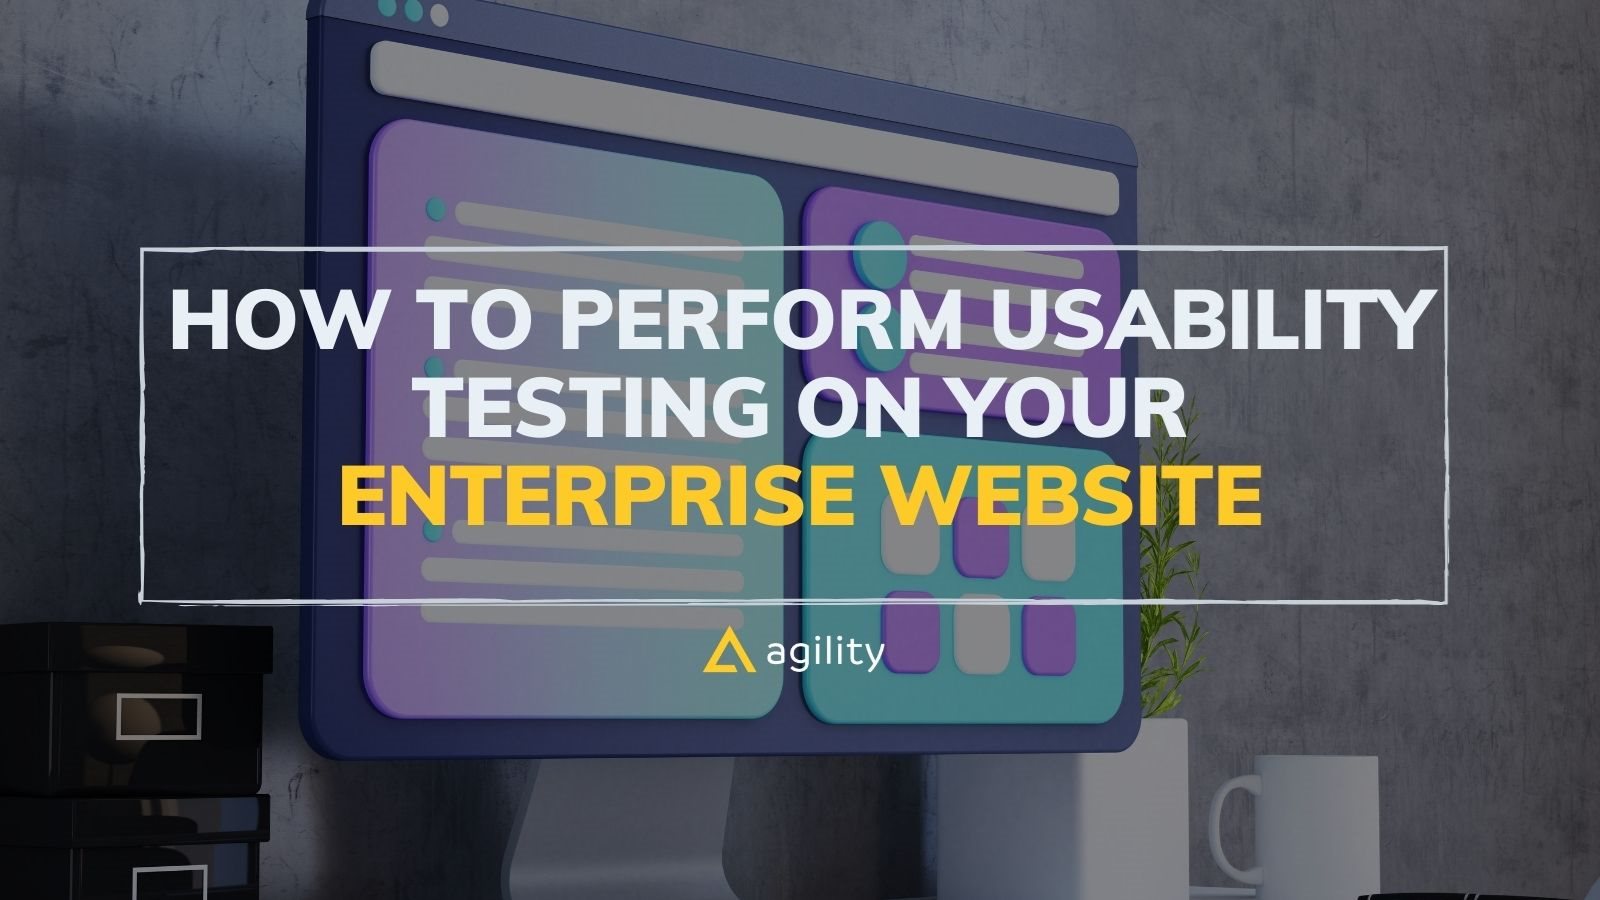 How to Perform Usability Testing on Your Enterprise Website